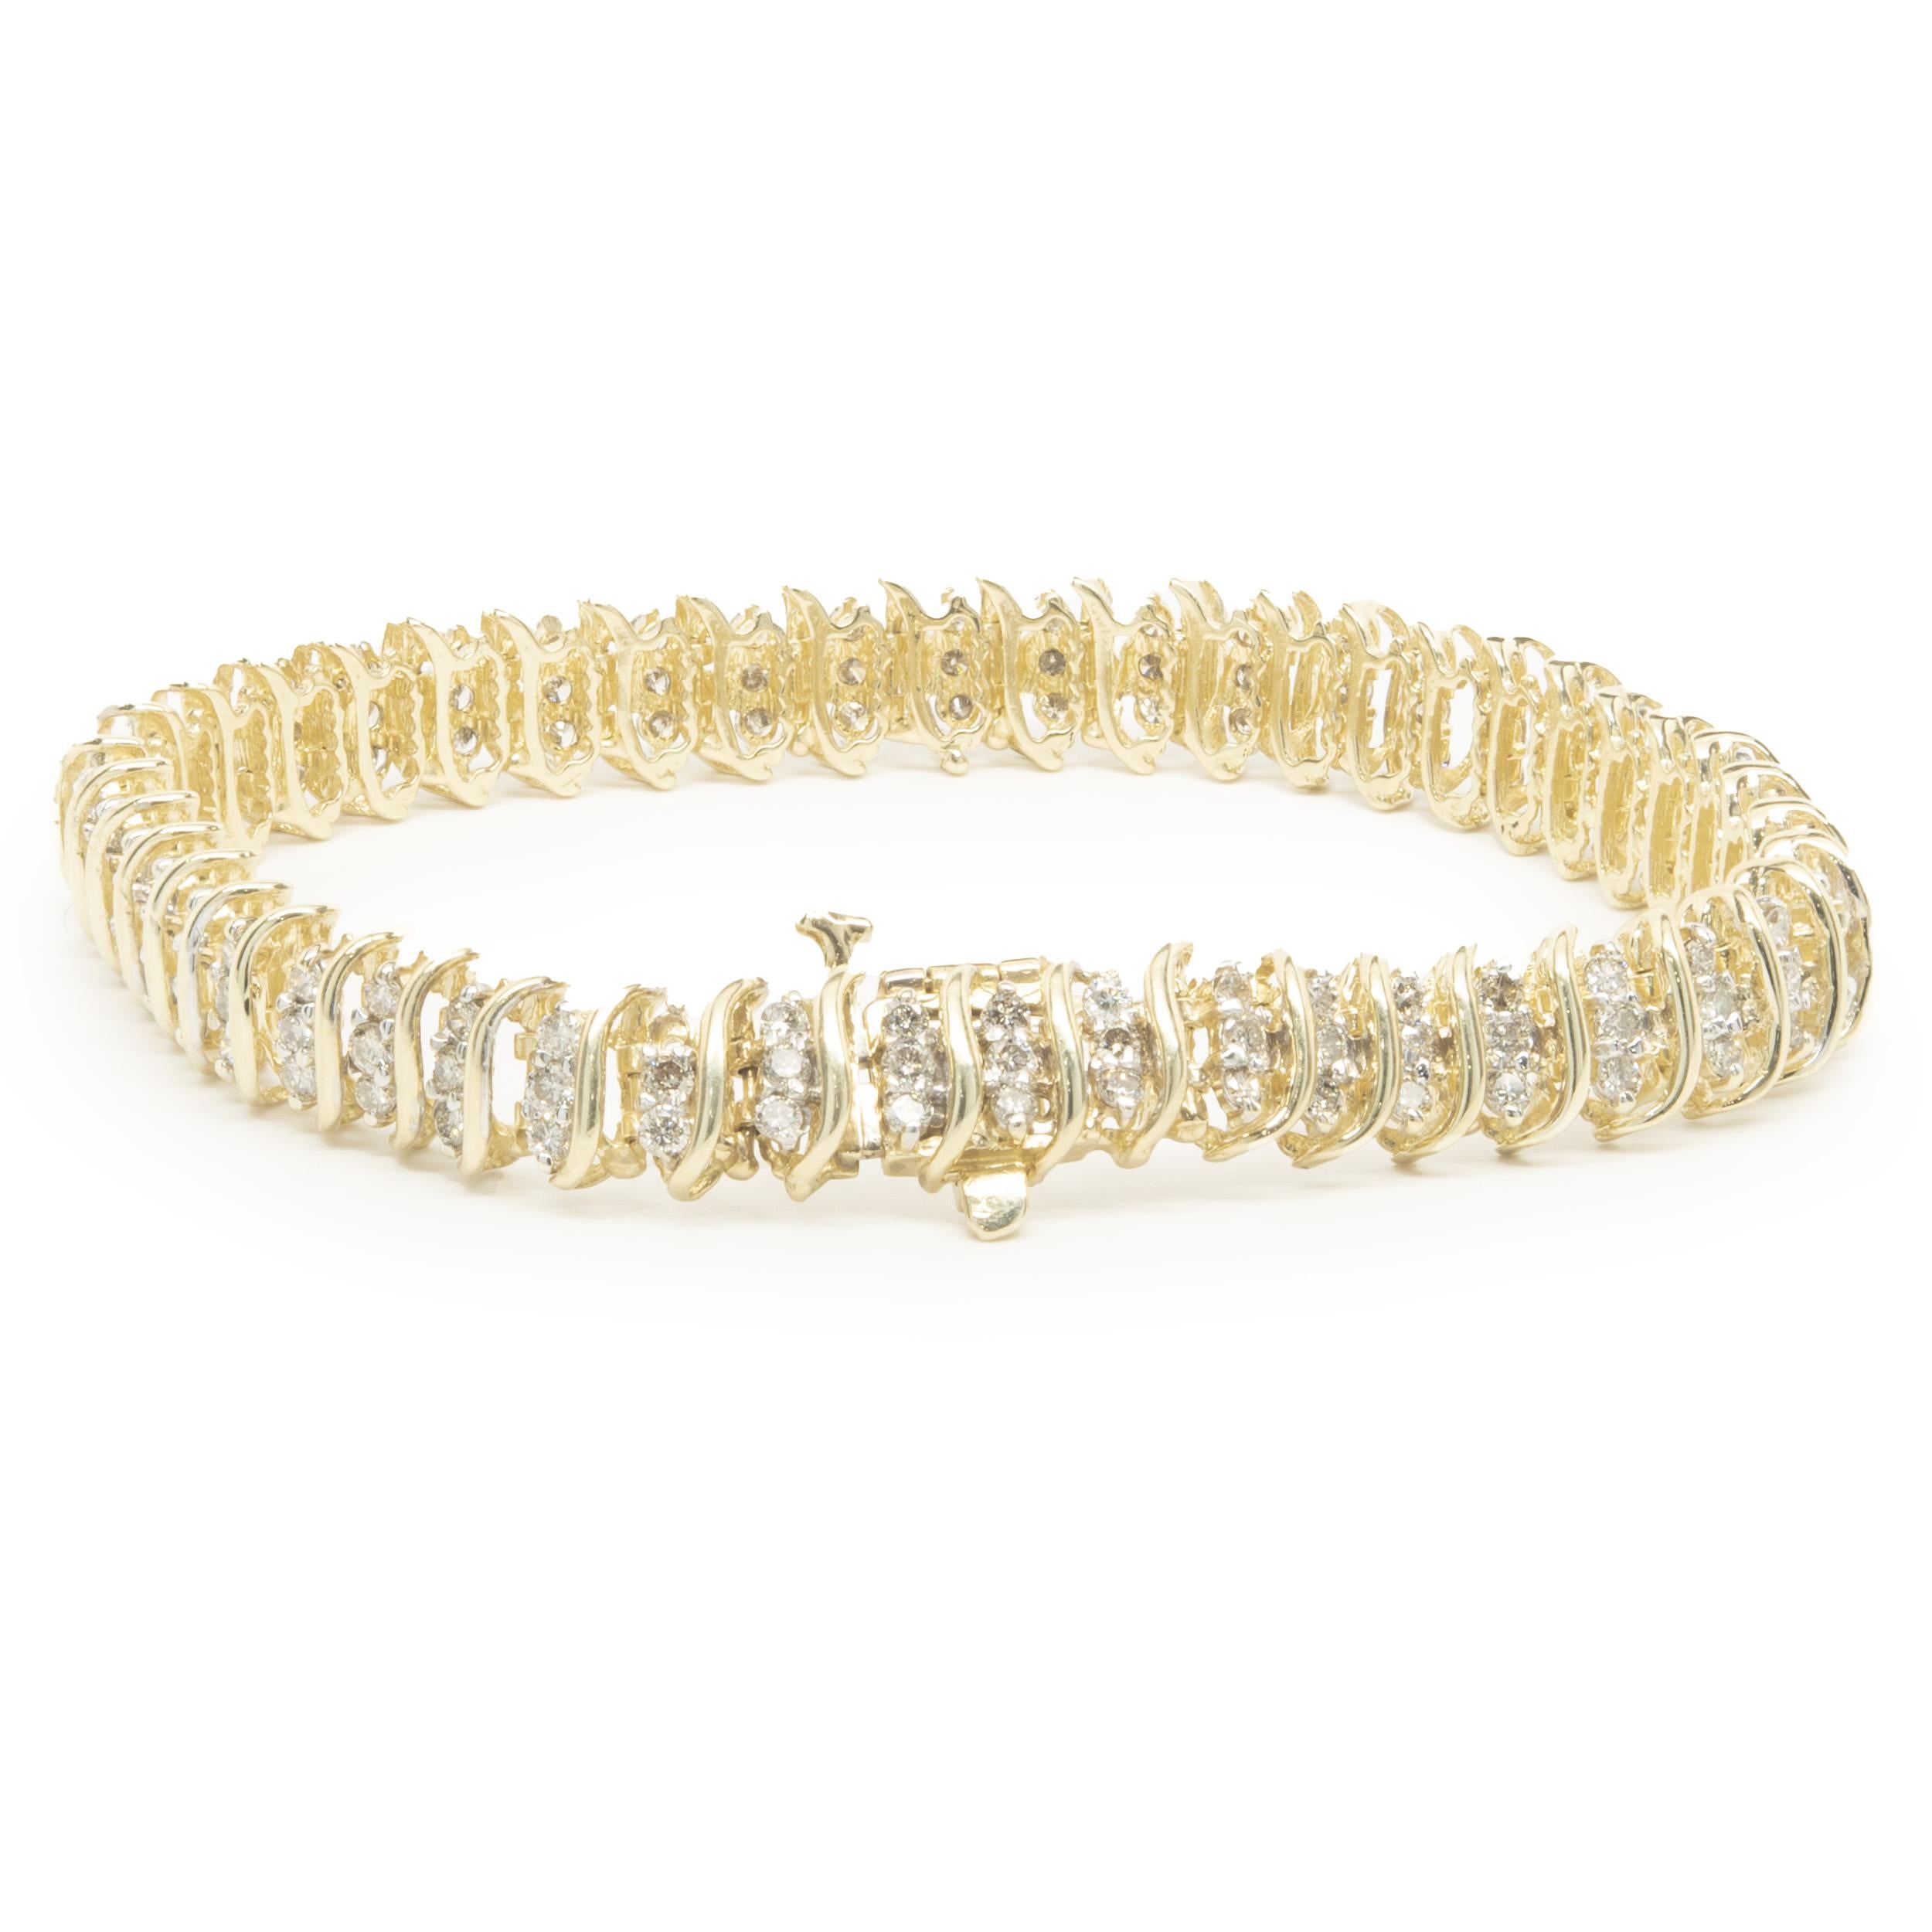 Designer: custom
Material: 14K yellow gold
Diamonds: 144 round brilliant cut = 4.30cttw
Color: H
Clarity: SI1-2
Dimensions: bracelet will fit up to a 7-inch wrist
Weight: 14.40 grams